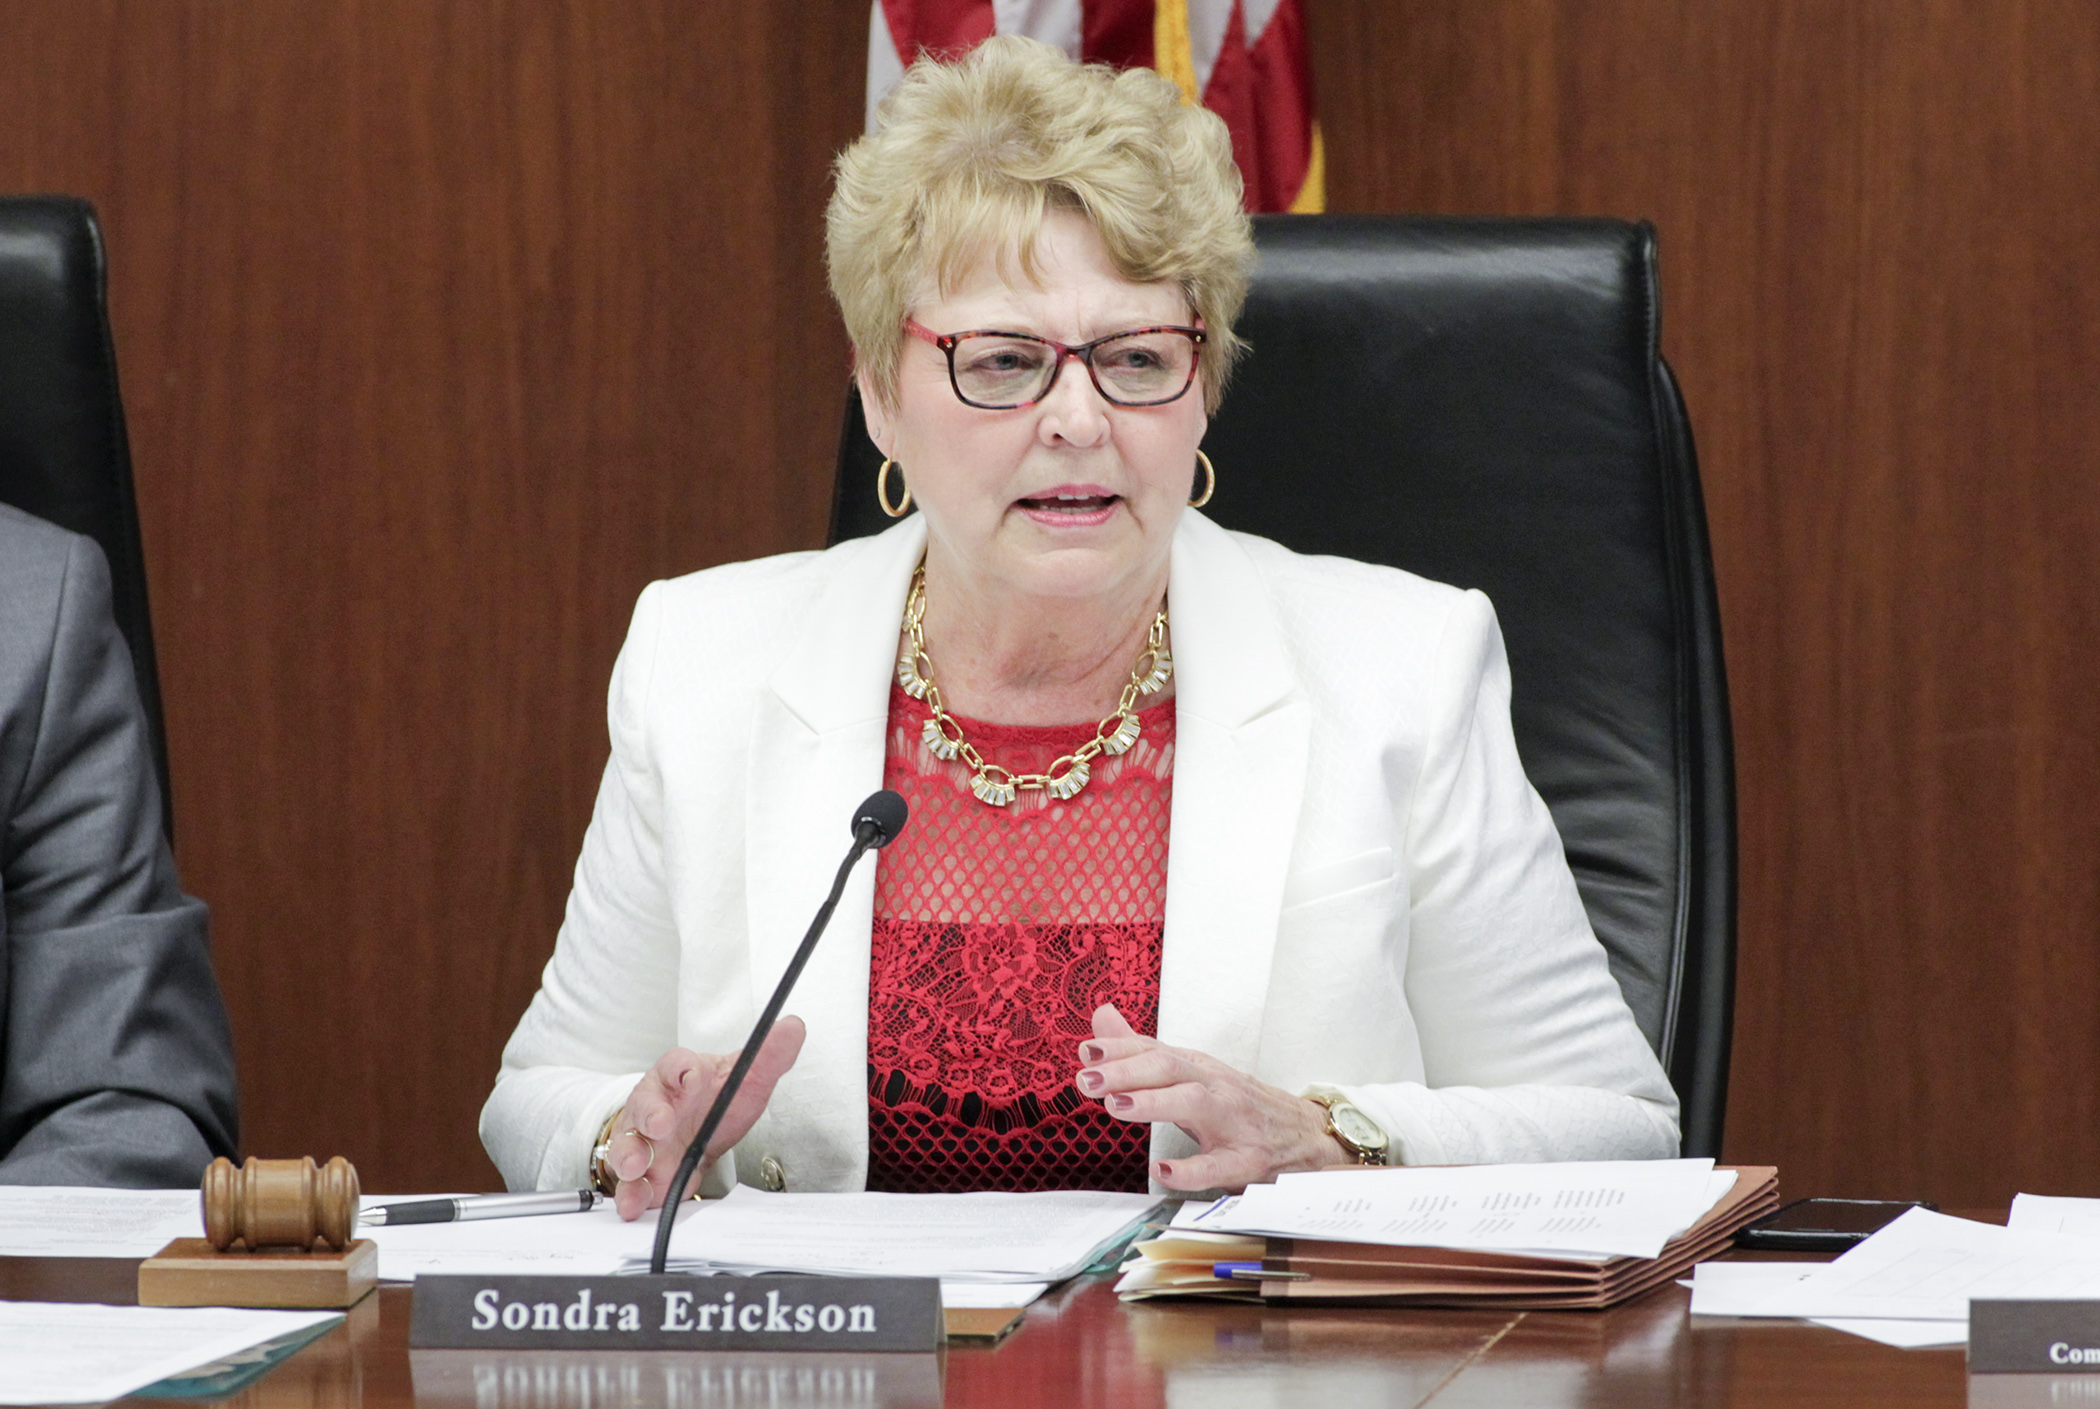 Rep. Sondra Erickson, chair of the House Education Innovation Policy Committee, discusses the omnibus education policy bill that she sponsors during a March 9 hearing. Photo by Paul Battaglia